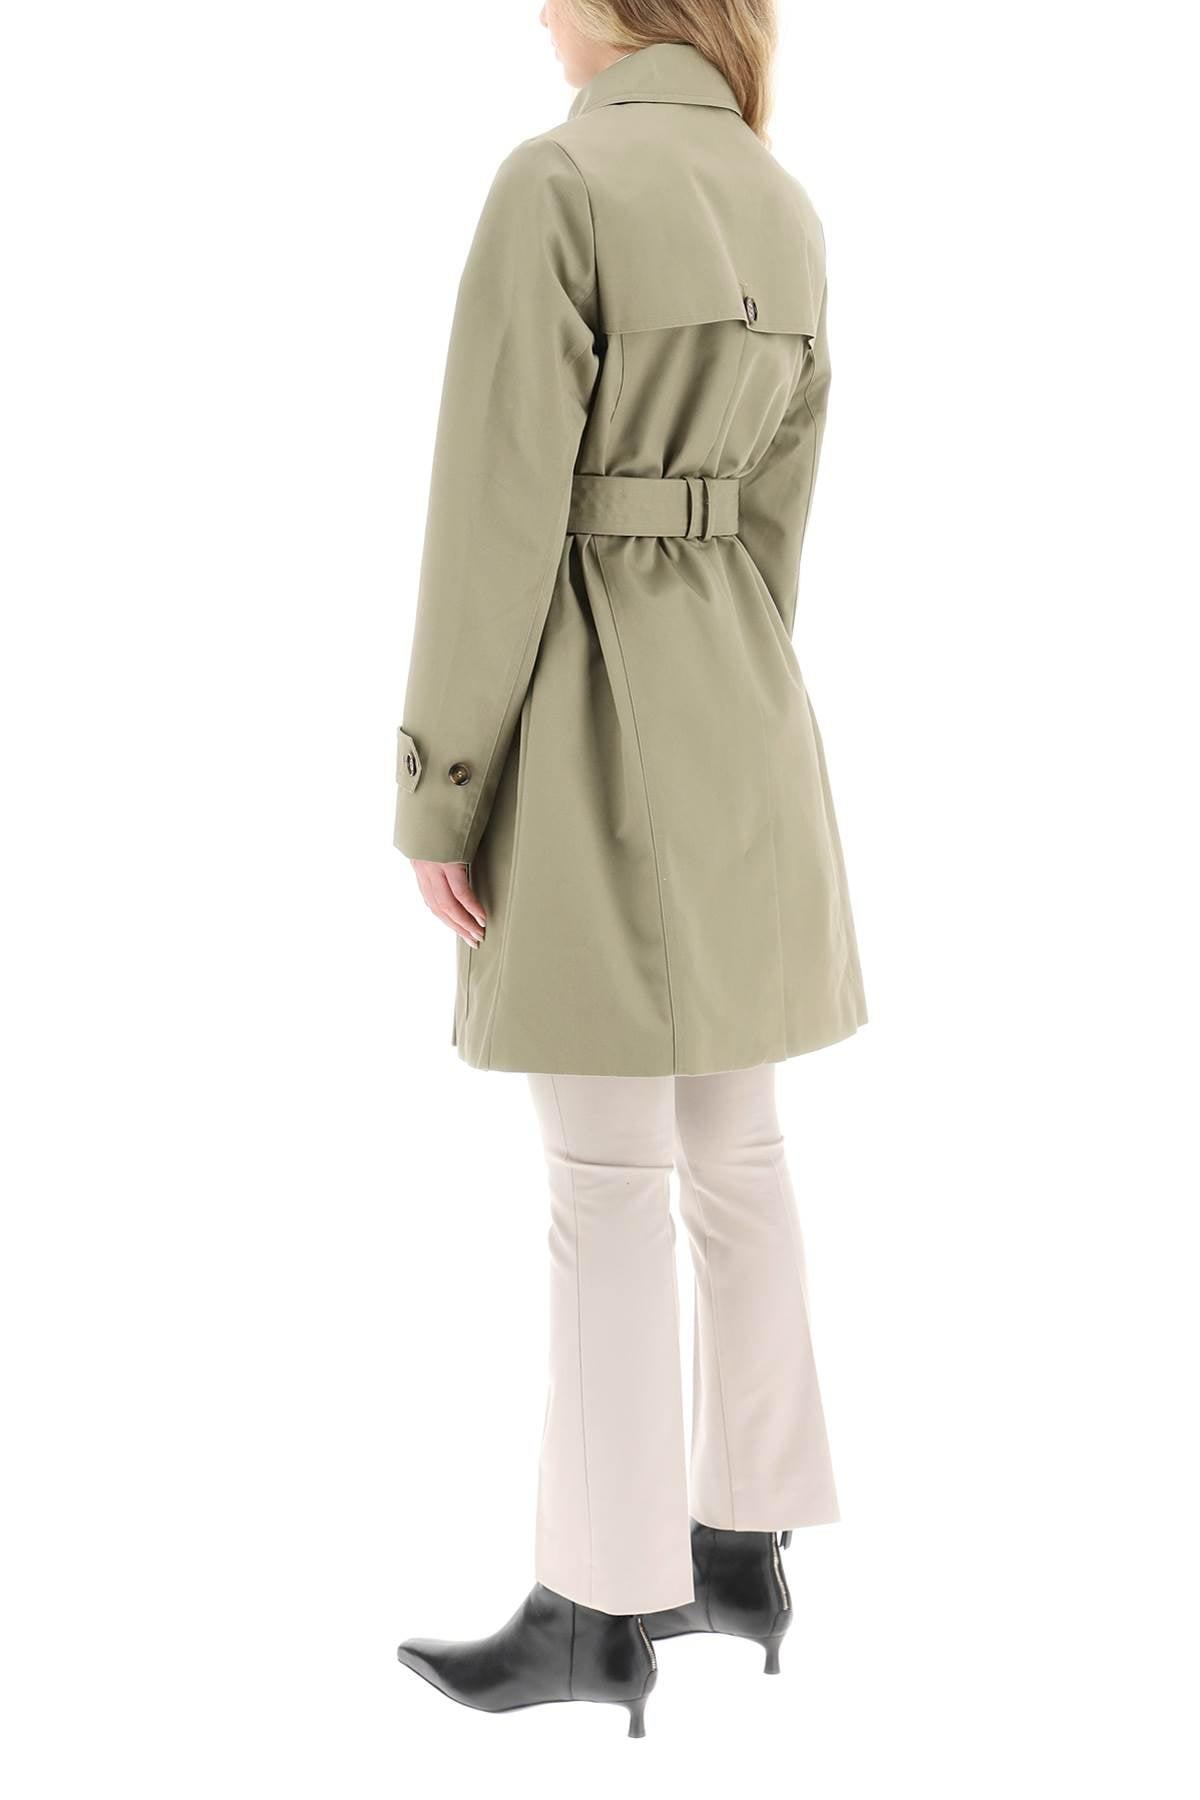 Barbour Greta Showerproof Double-breasted Trench Coat in Natural | Lyst